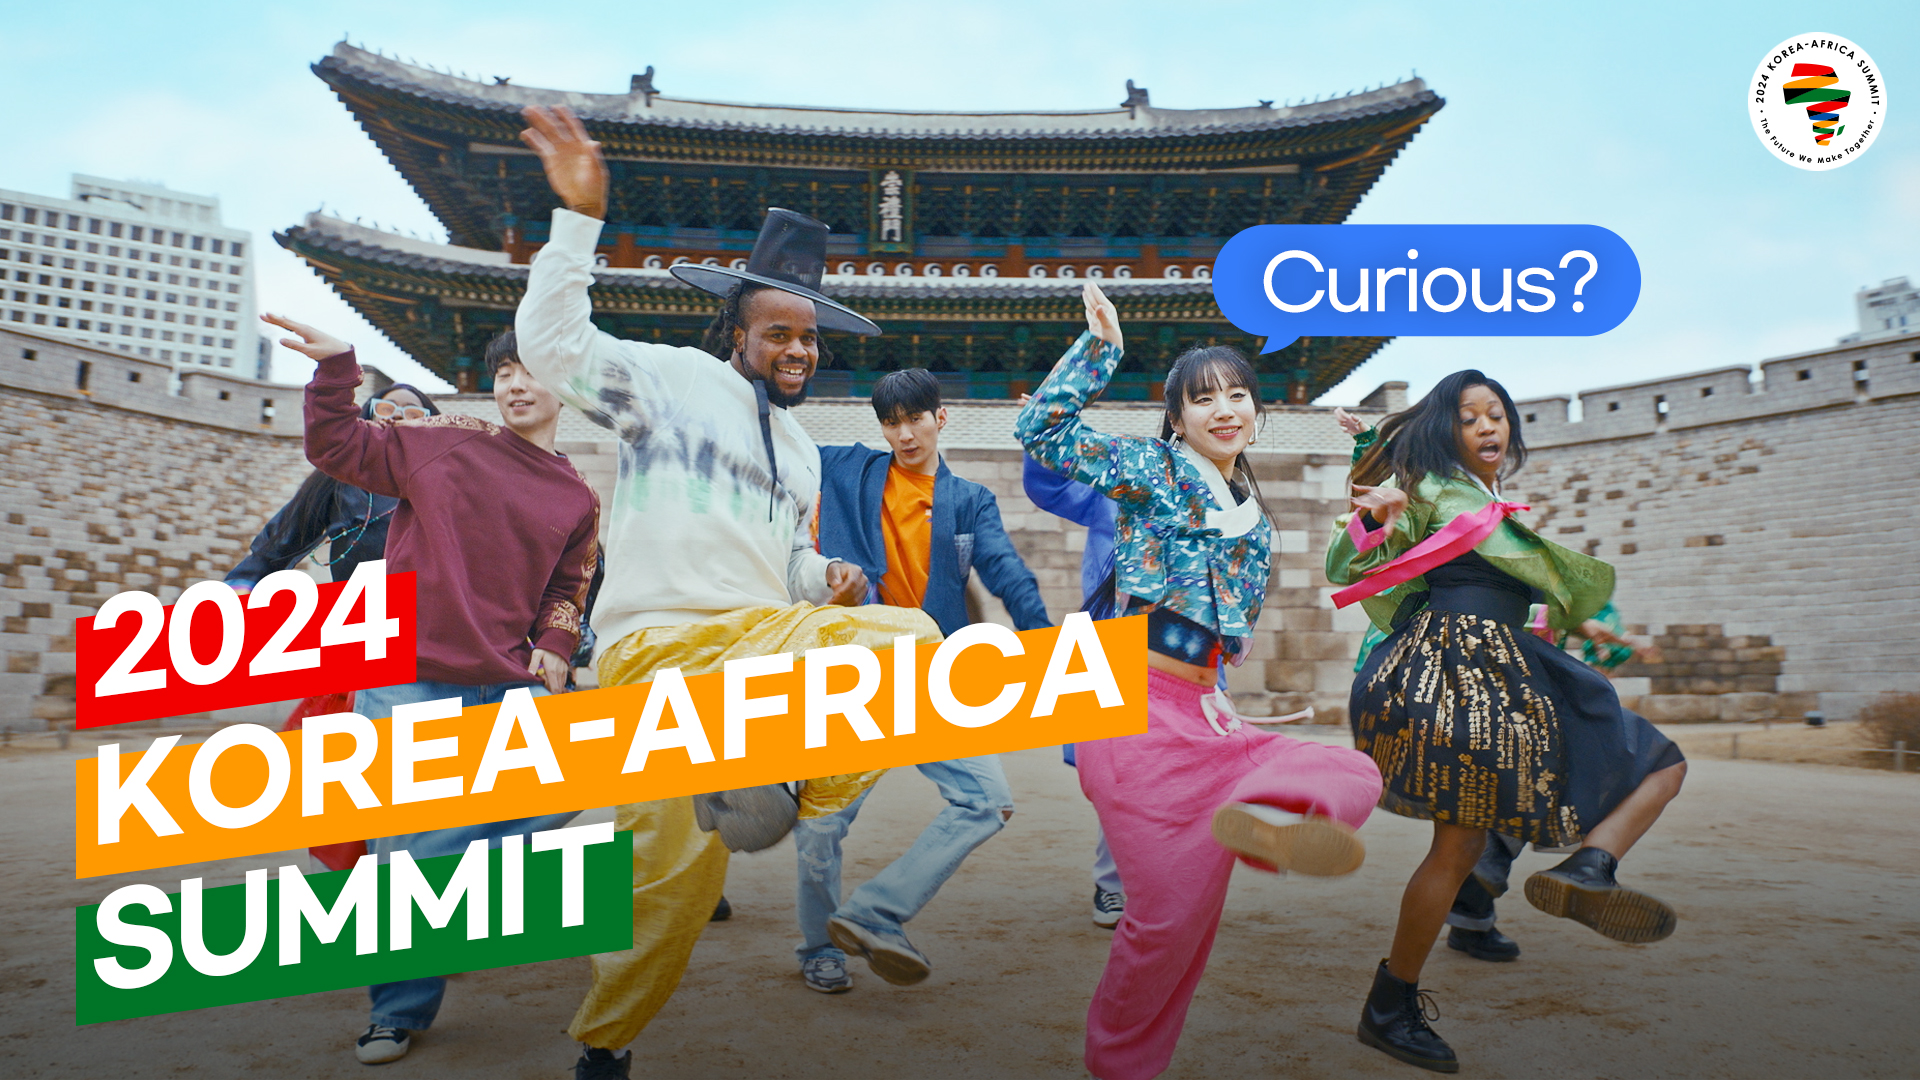 Curious about the 2024 Korea-Africa Summit?